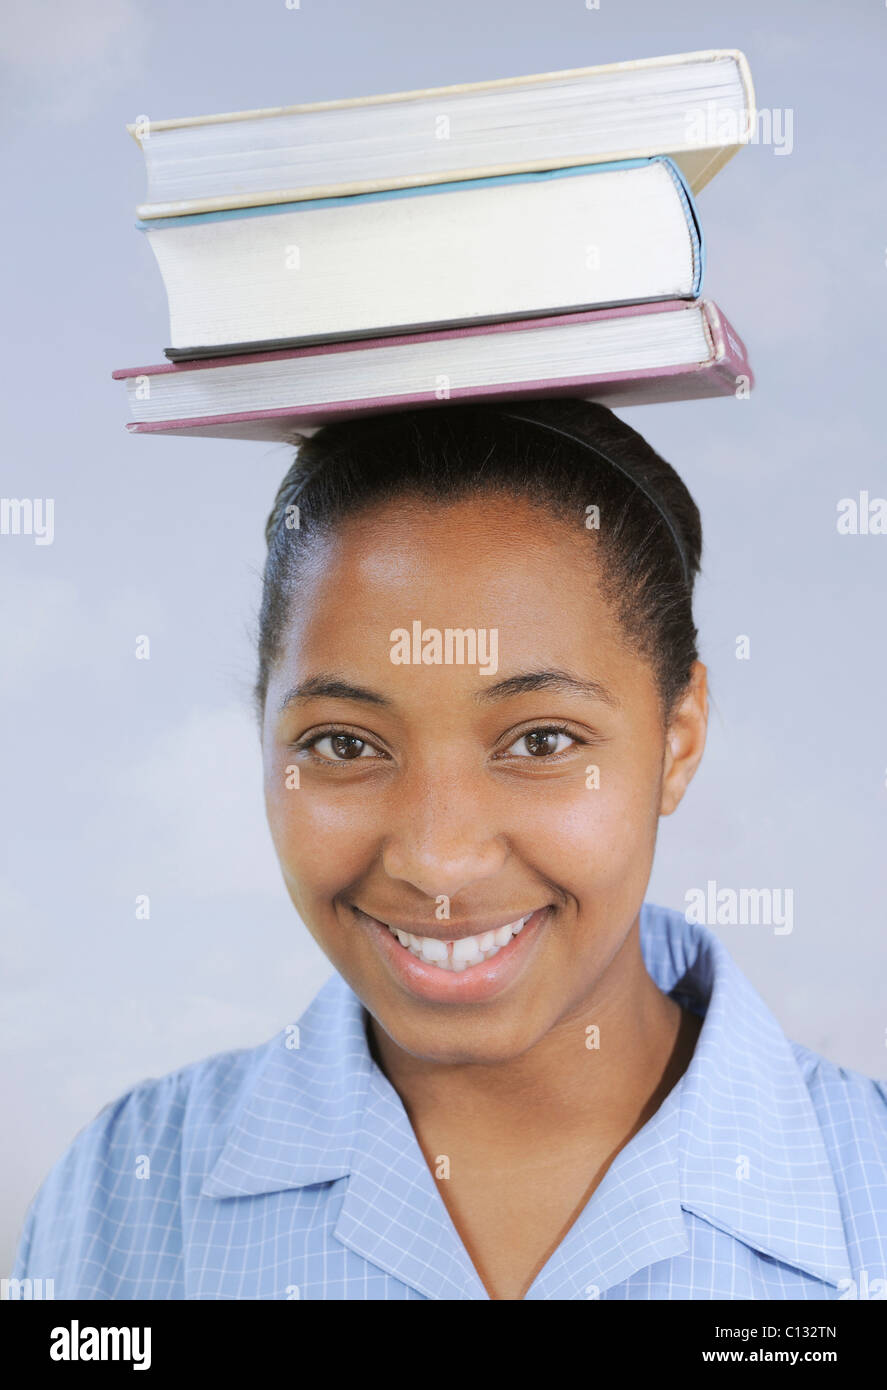 School girl with books balanced on her head, Cape Town, South Africa Stock Photo